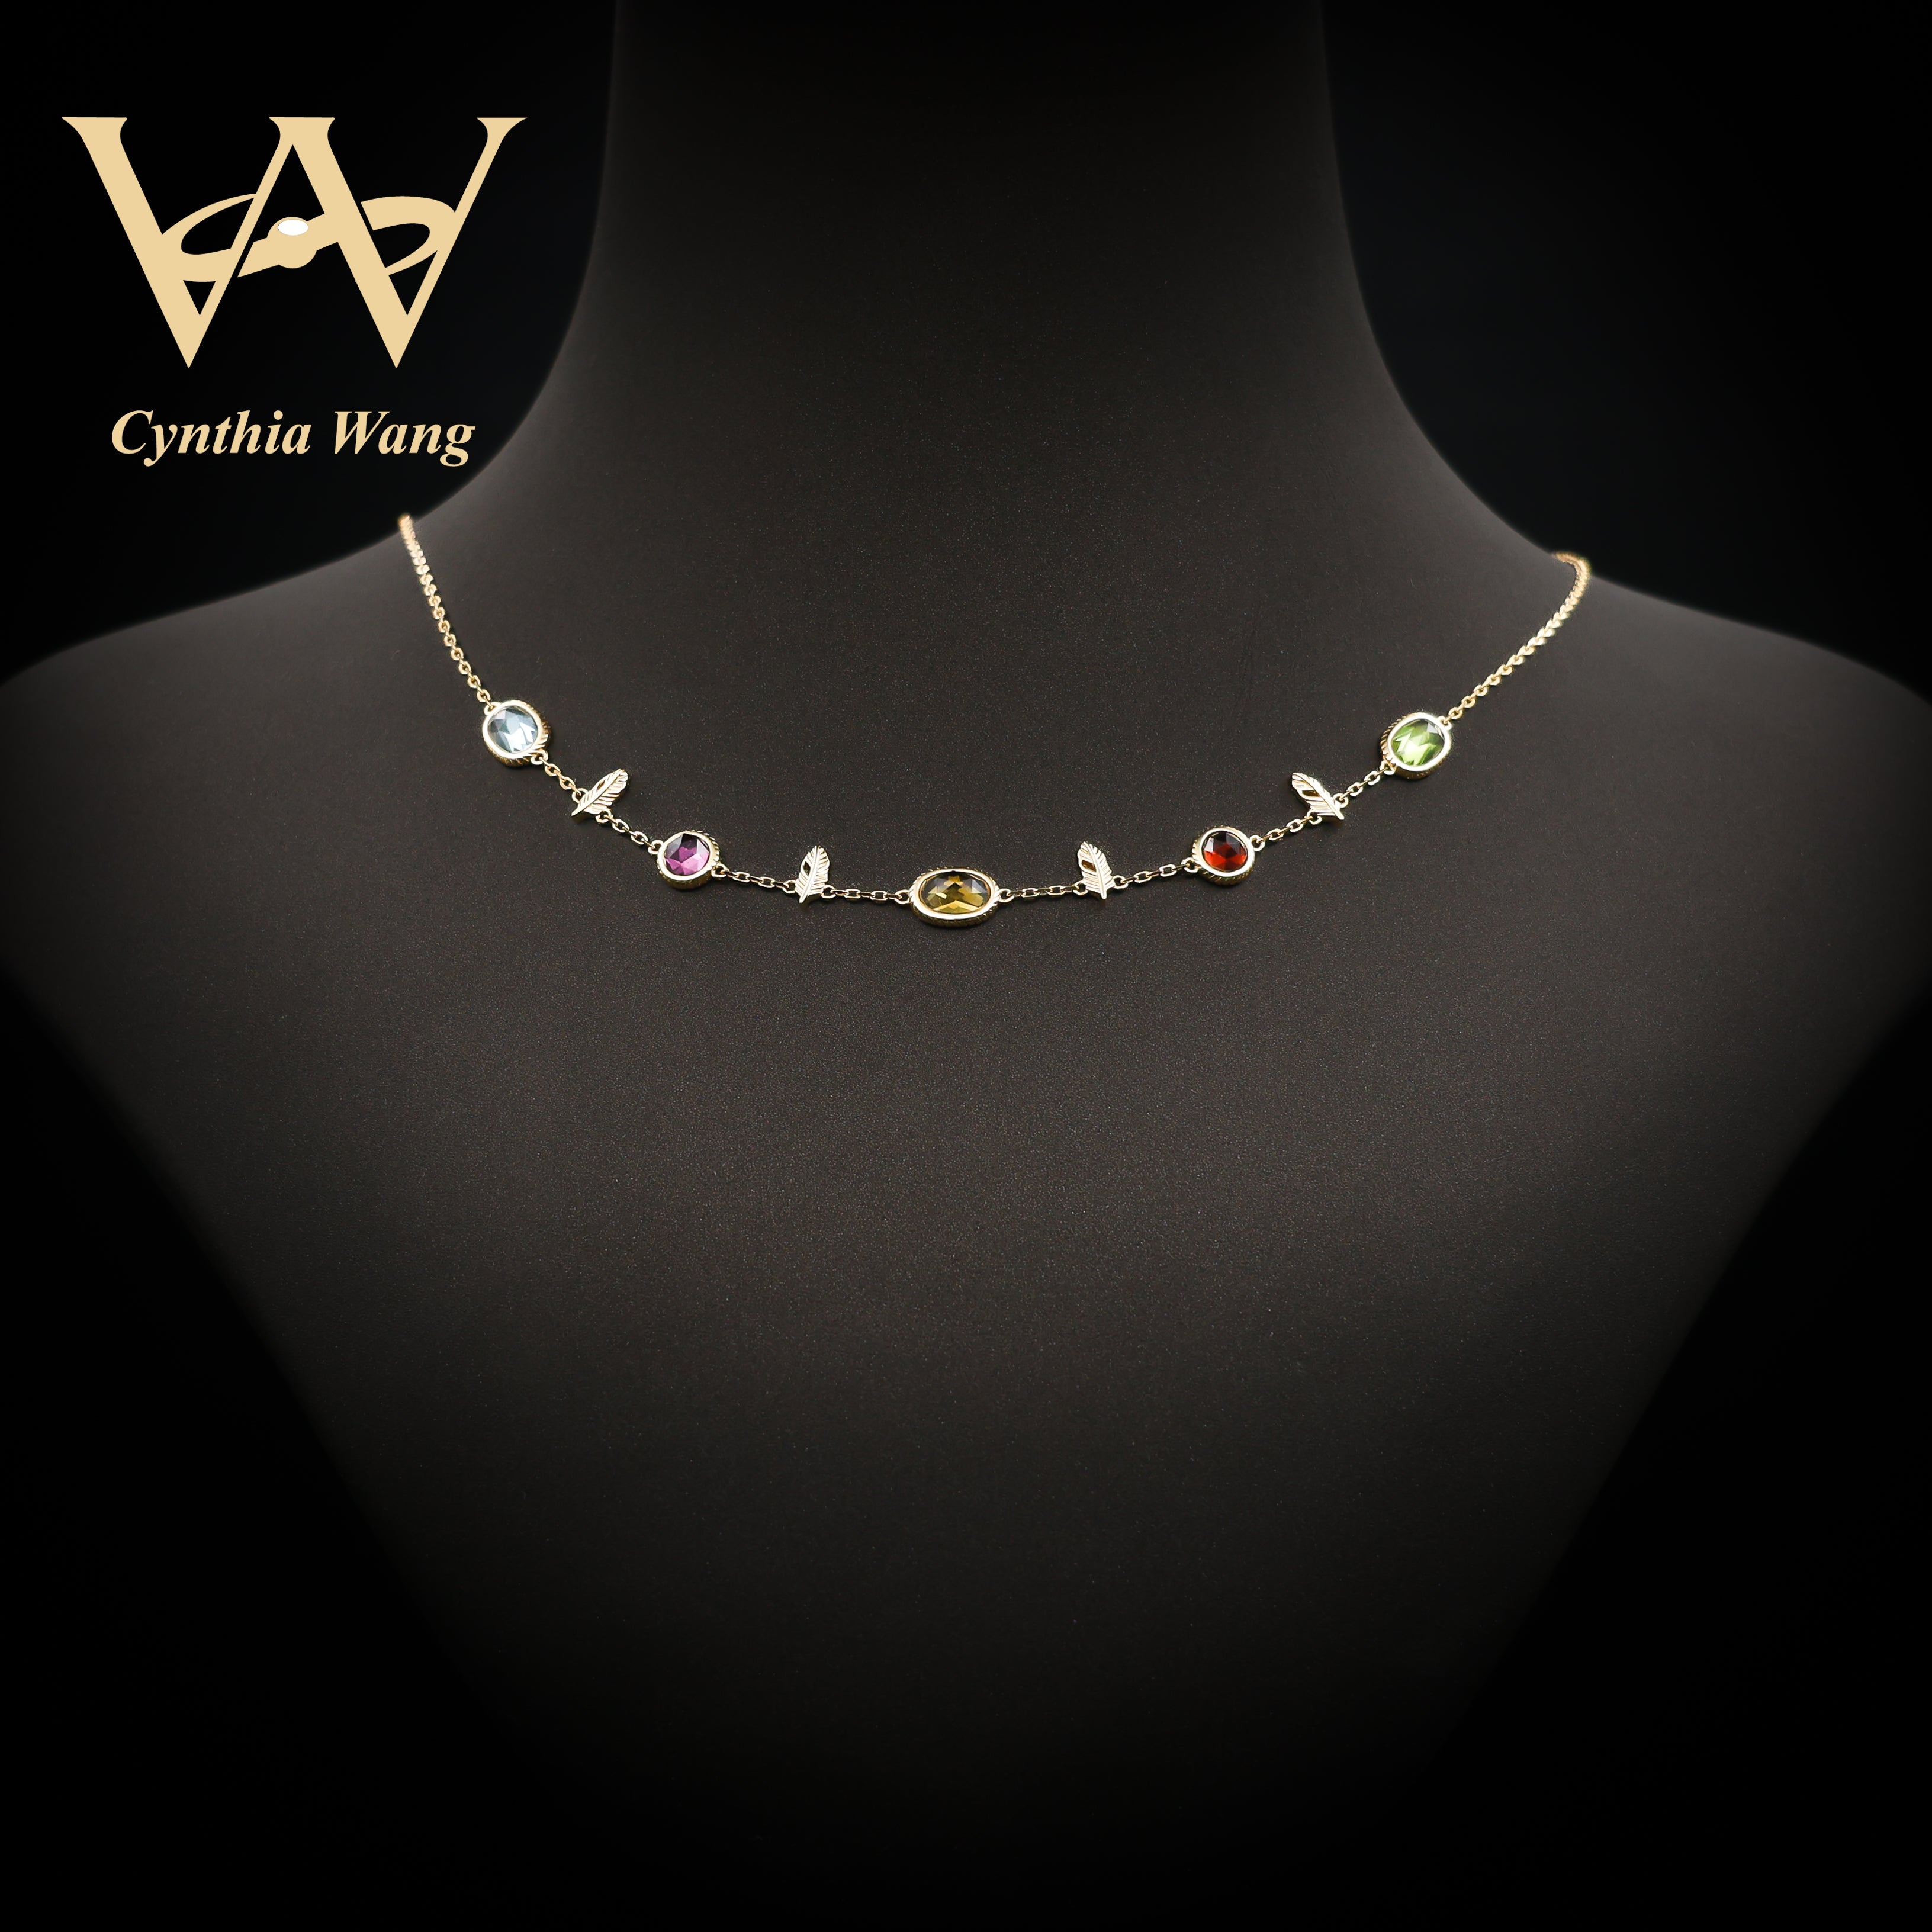 'A Midsummer Night's Dream' Multicolored Gems Necklace